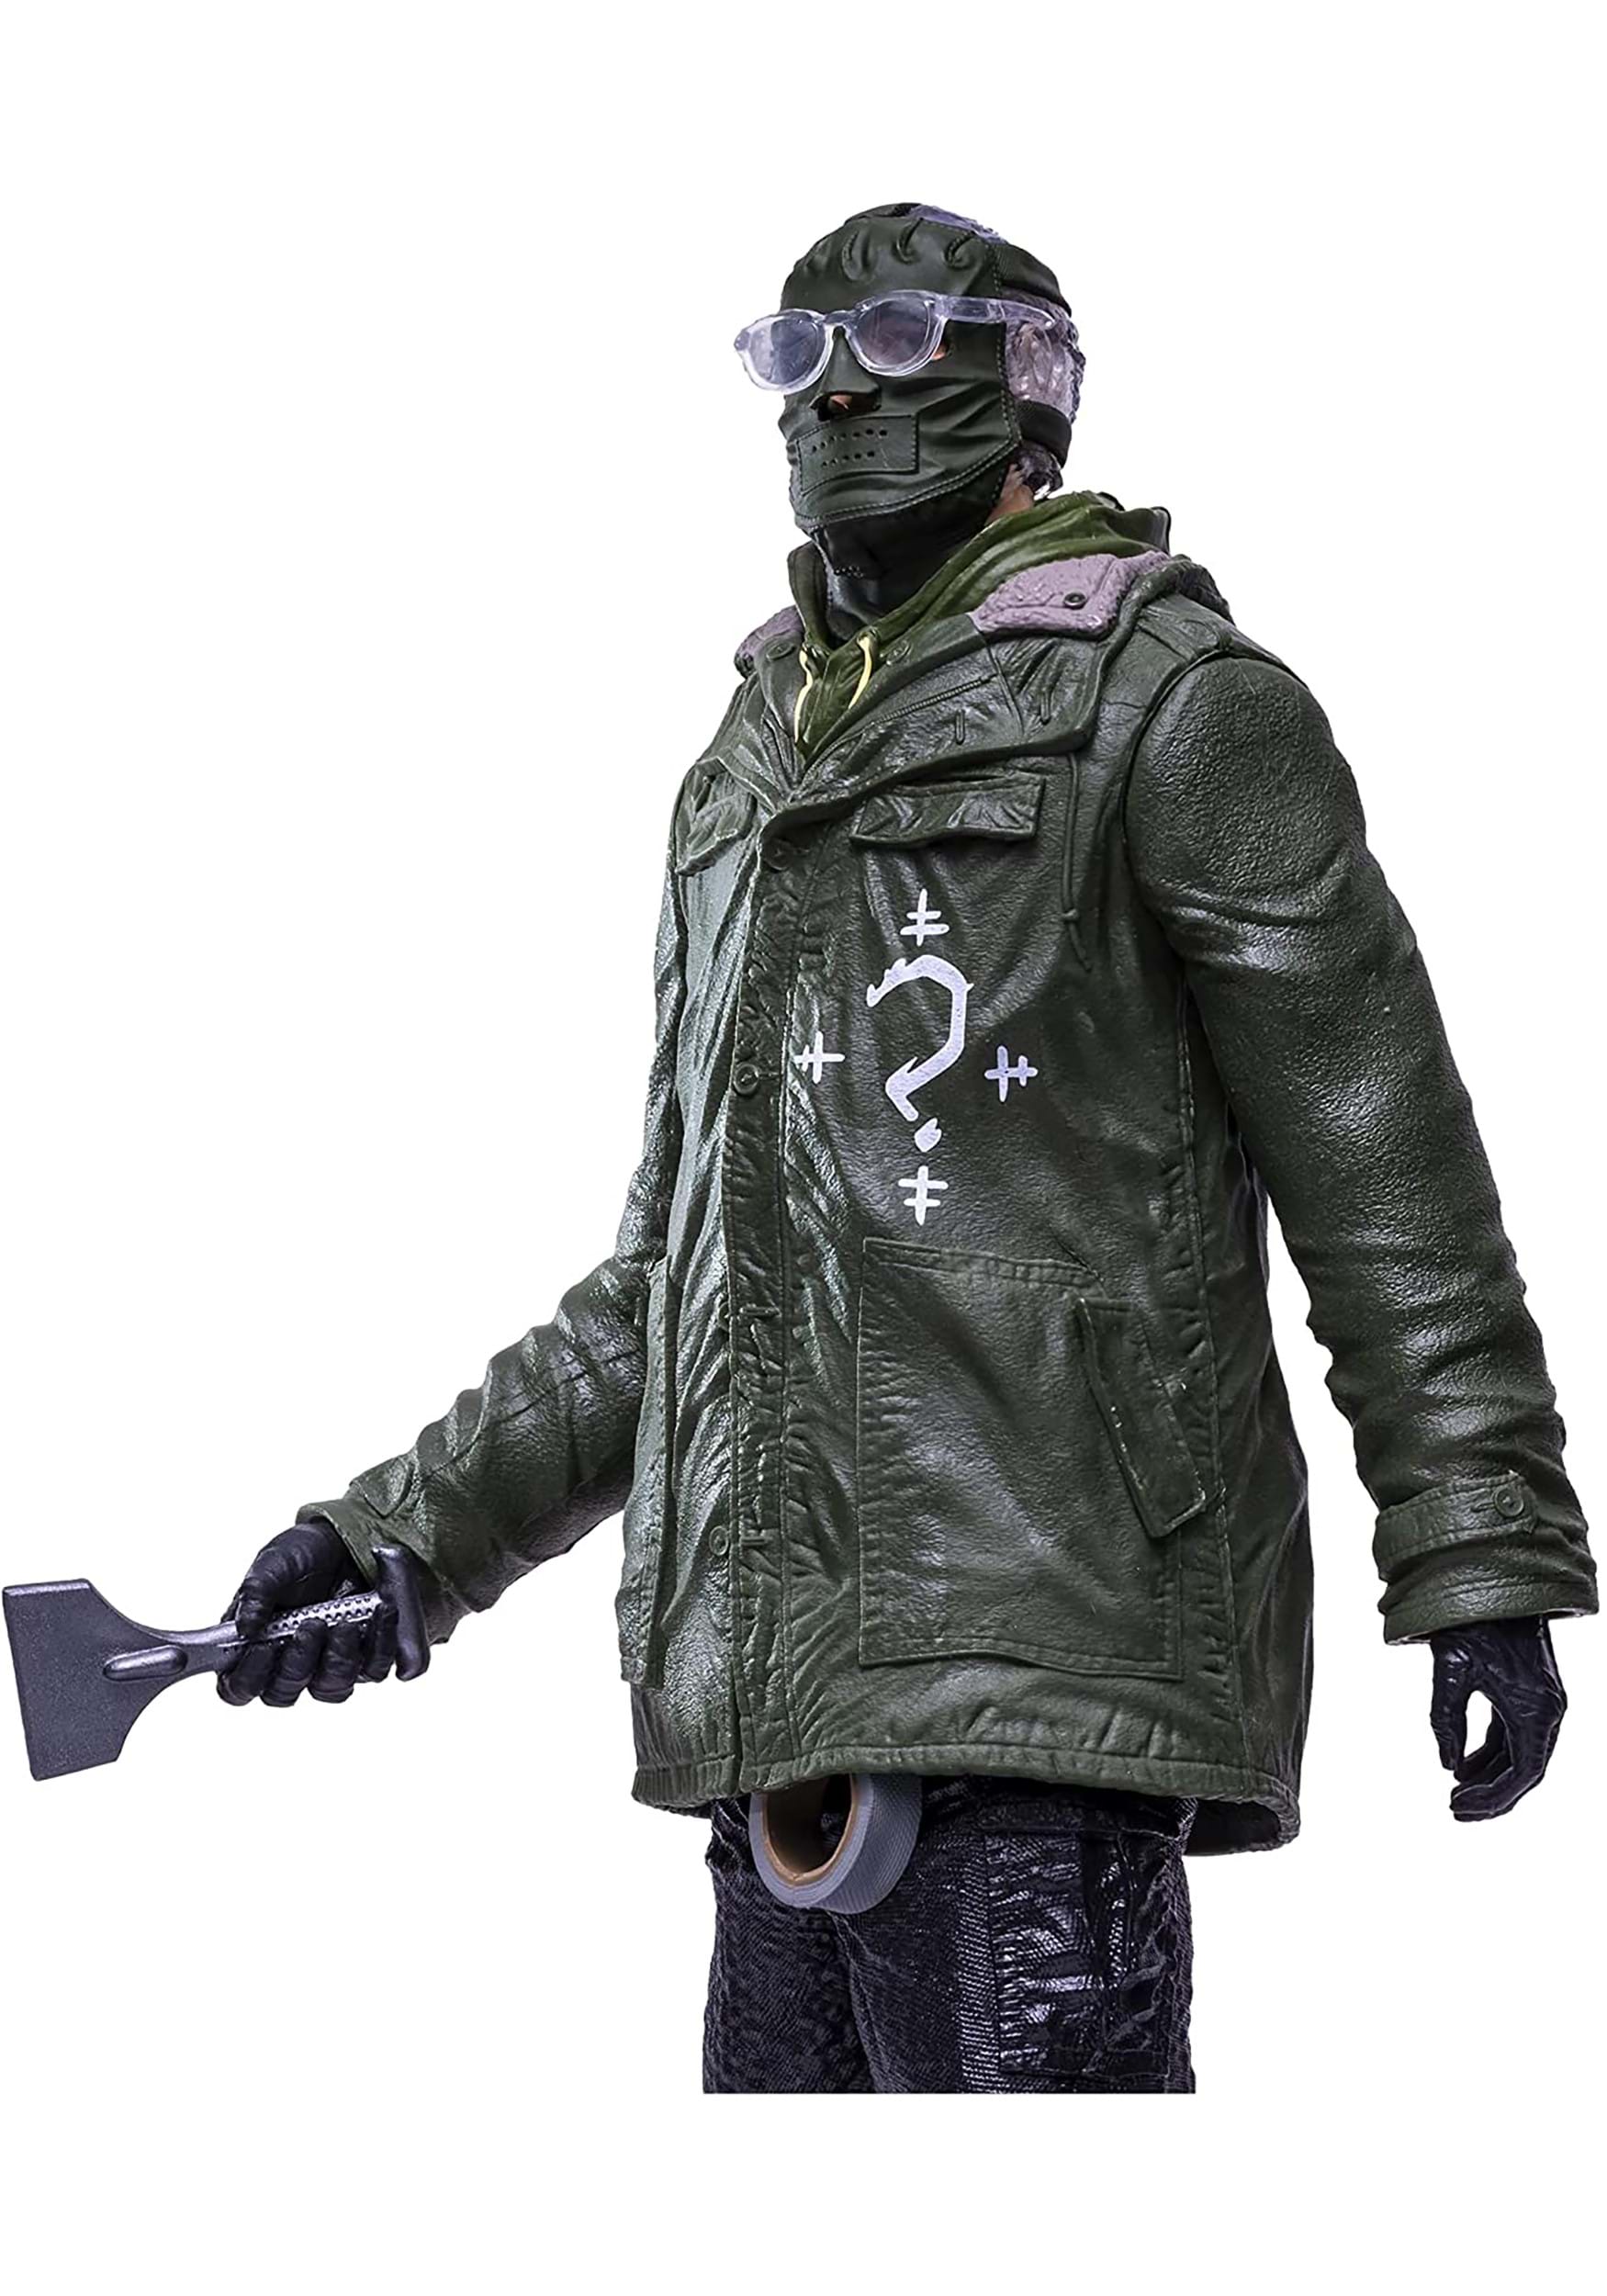 The Riddler From DCs The Batman Movie 12-Inch Posed Statue